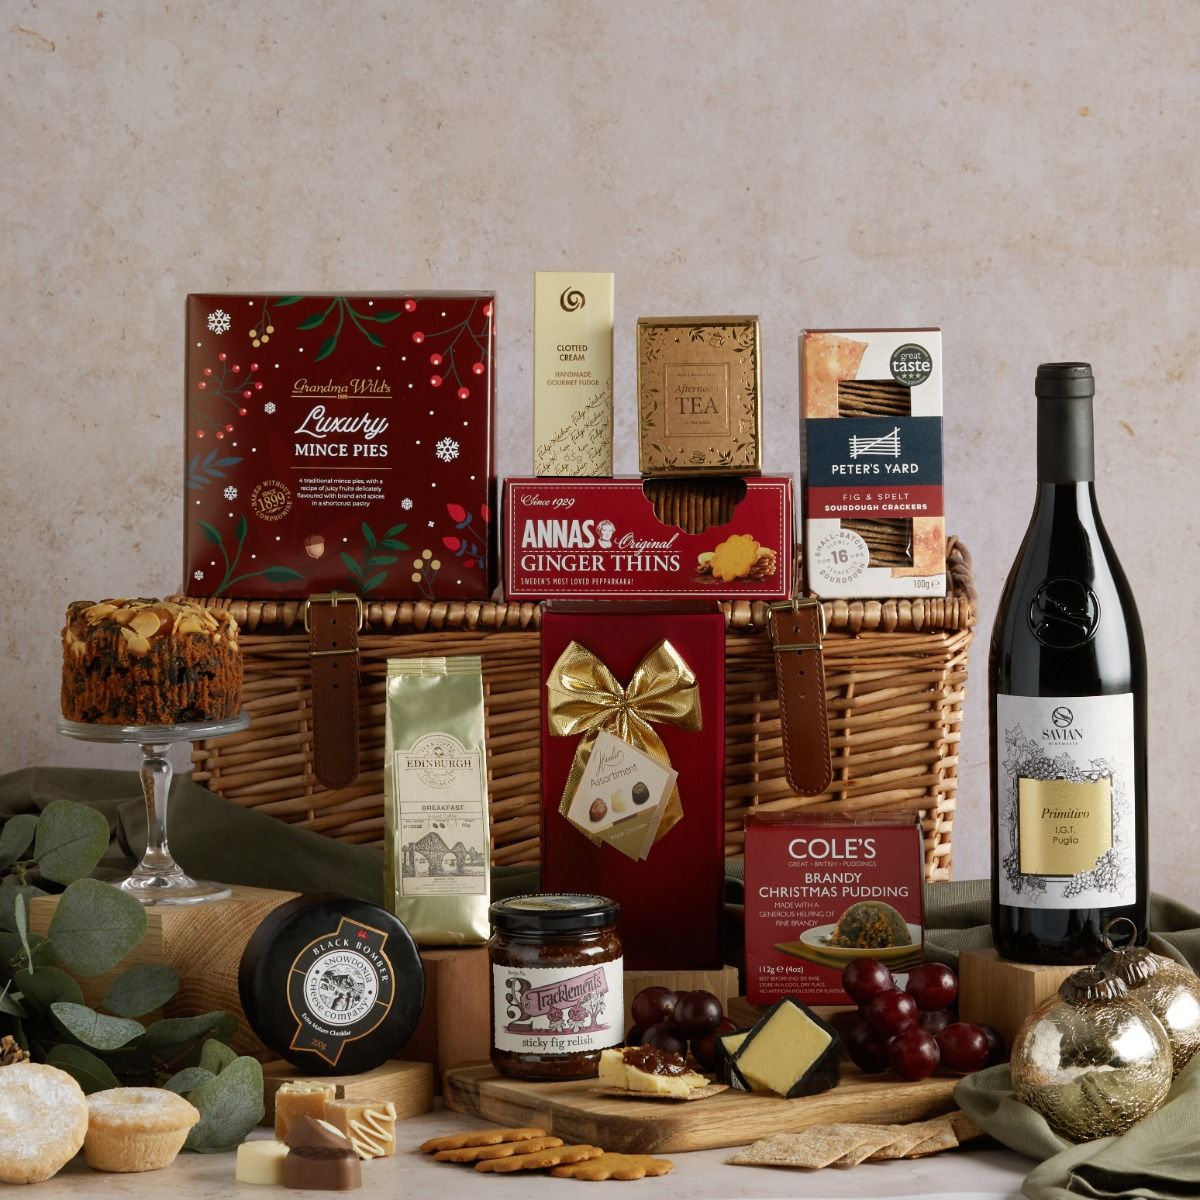 Luxury Christmas Cracker Hamper with contents on display and the wicker basket